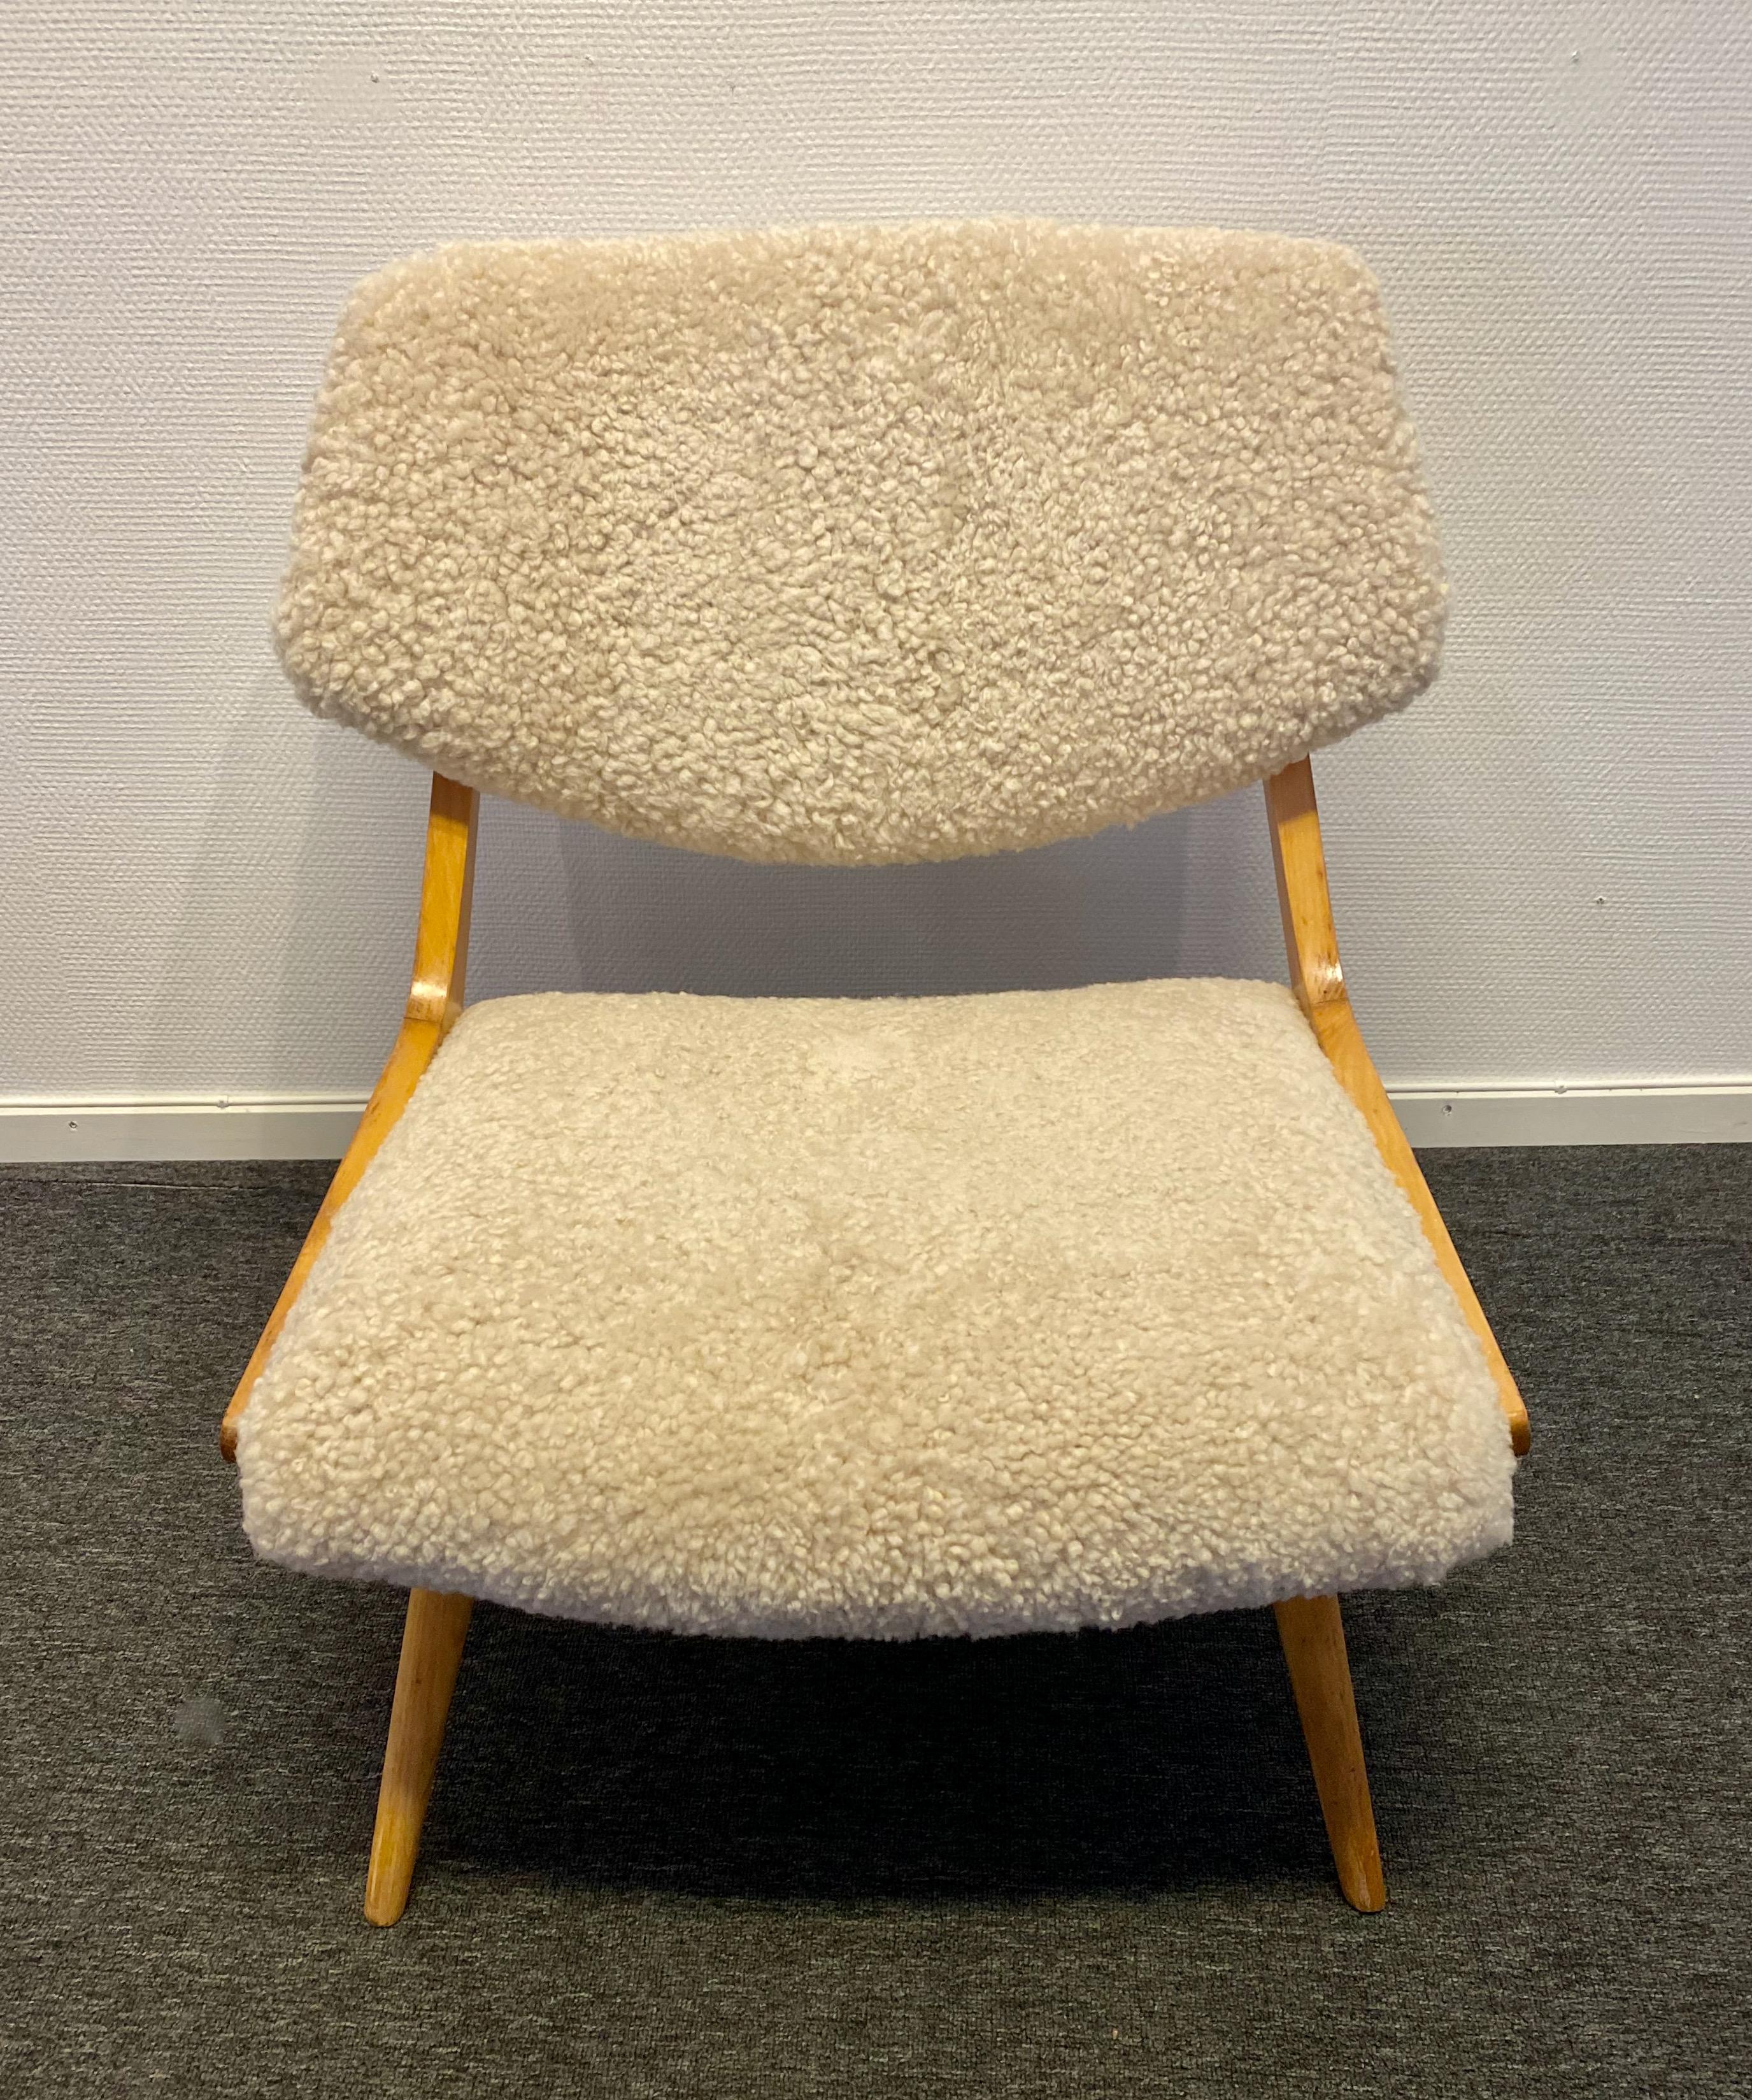 The Easy chair no 915 was designed by Svante Skogh in 1955 and manufactured by Hjertquist & Co. in Nässjö Sweden. It is extremely rare on the second hand market today. Extremely comfortable with an audacious design where the boomerang backrest